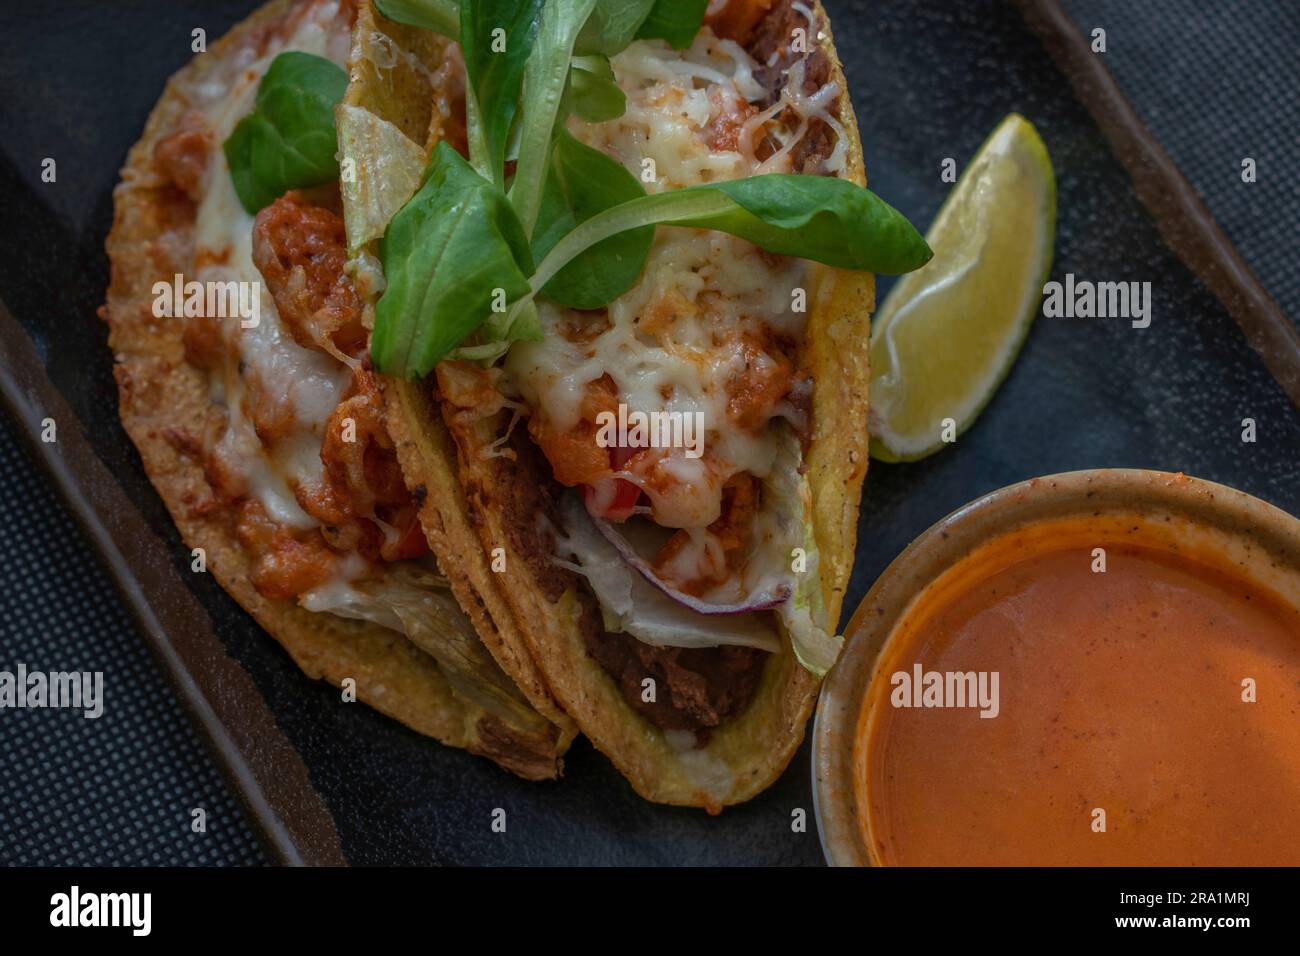 Flavorful Mexican-style tacos featuring succulent shrimp, tomatoes, cheese, chili, and onions, served with a side of hot and tangy Mexican sauce for a Stock Photo